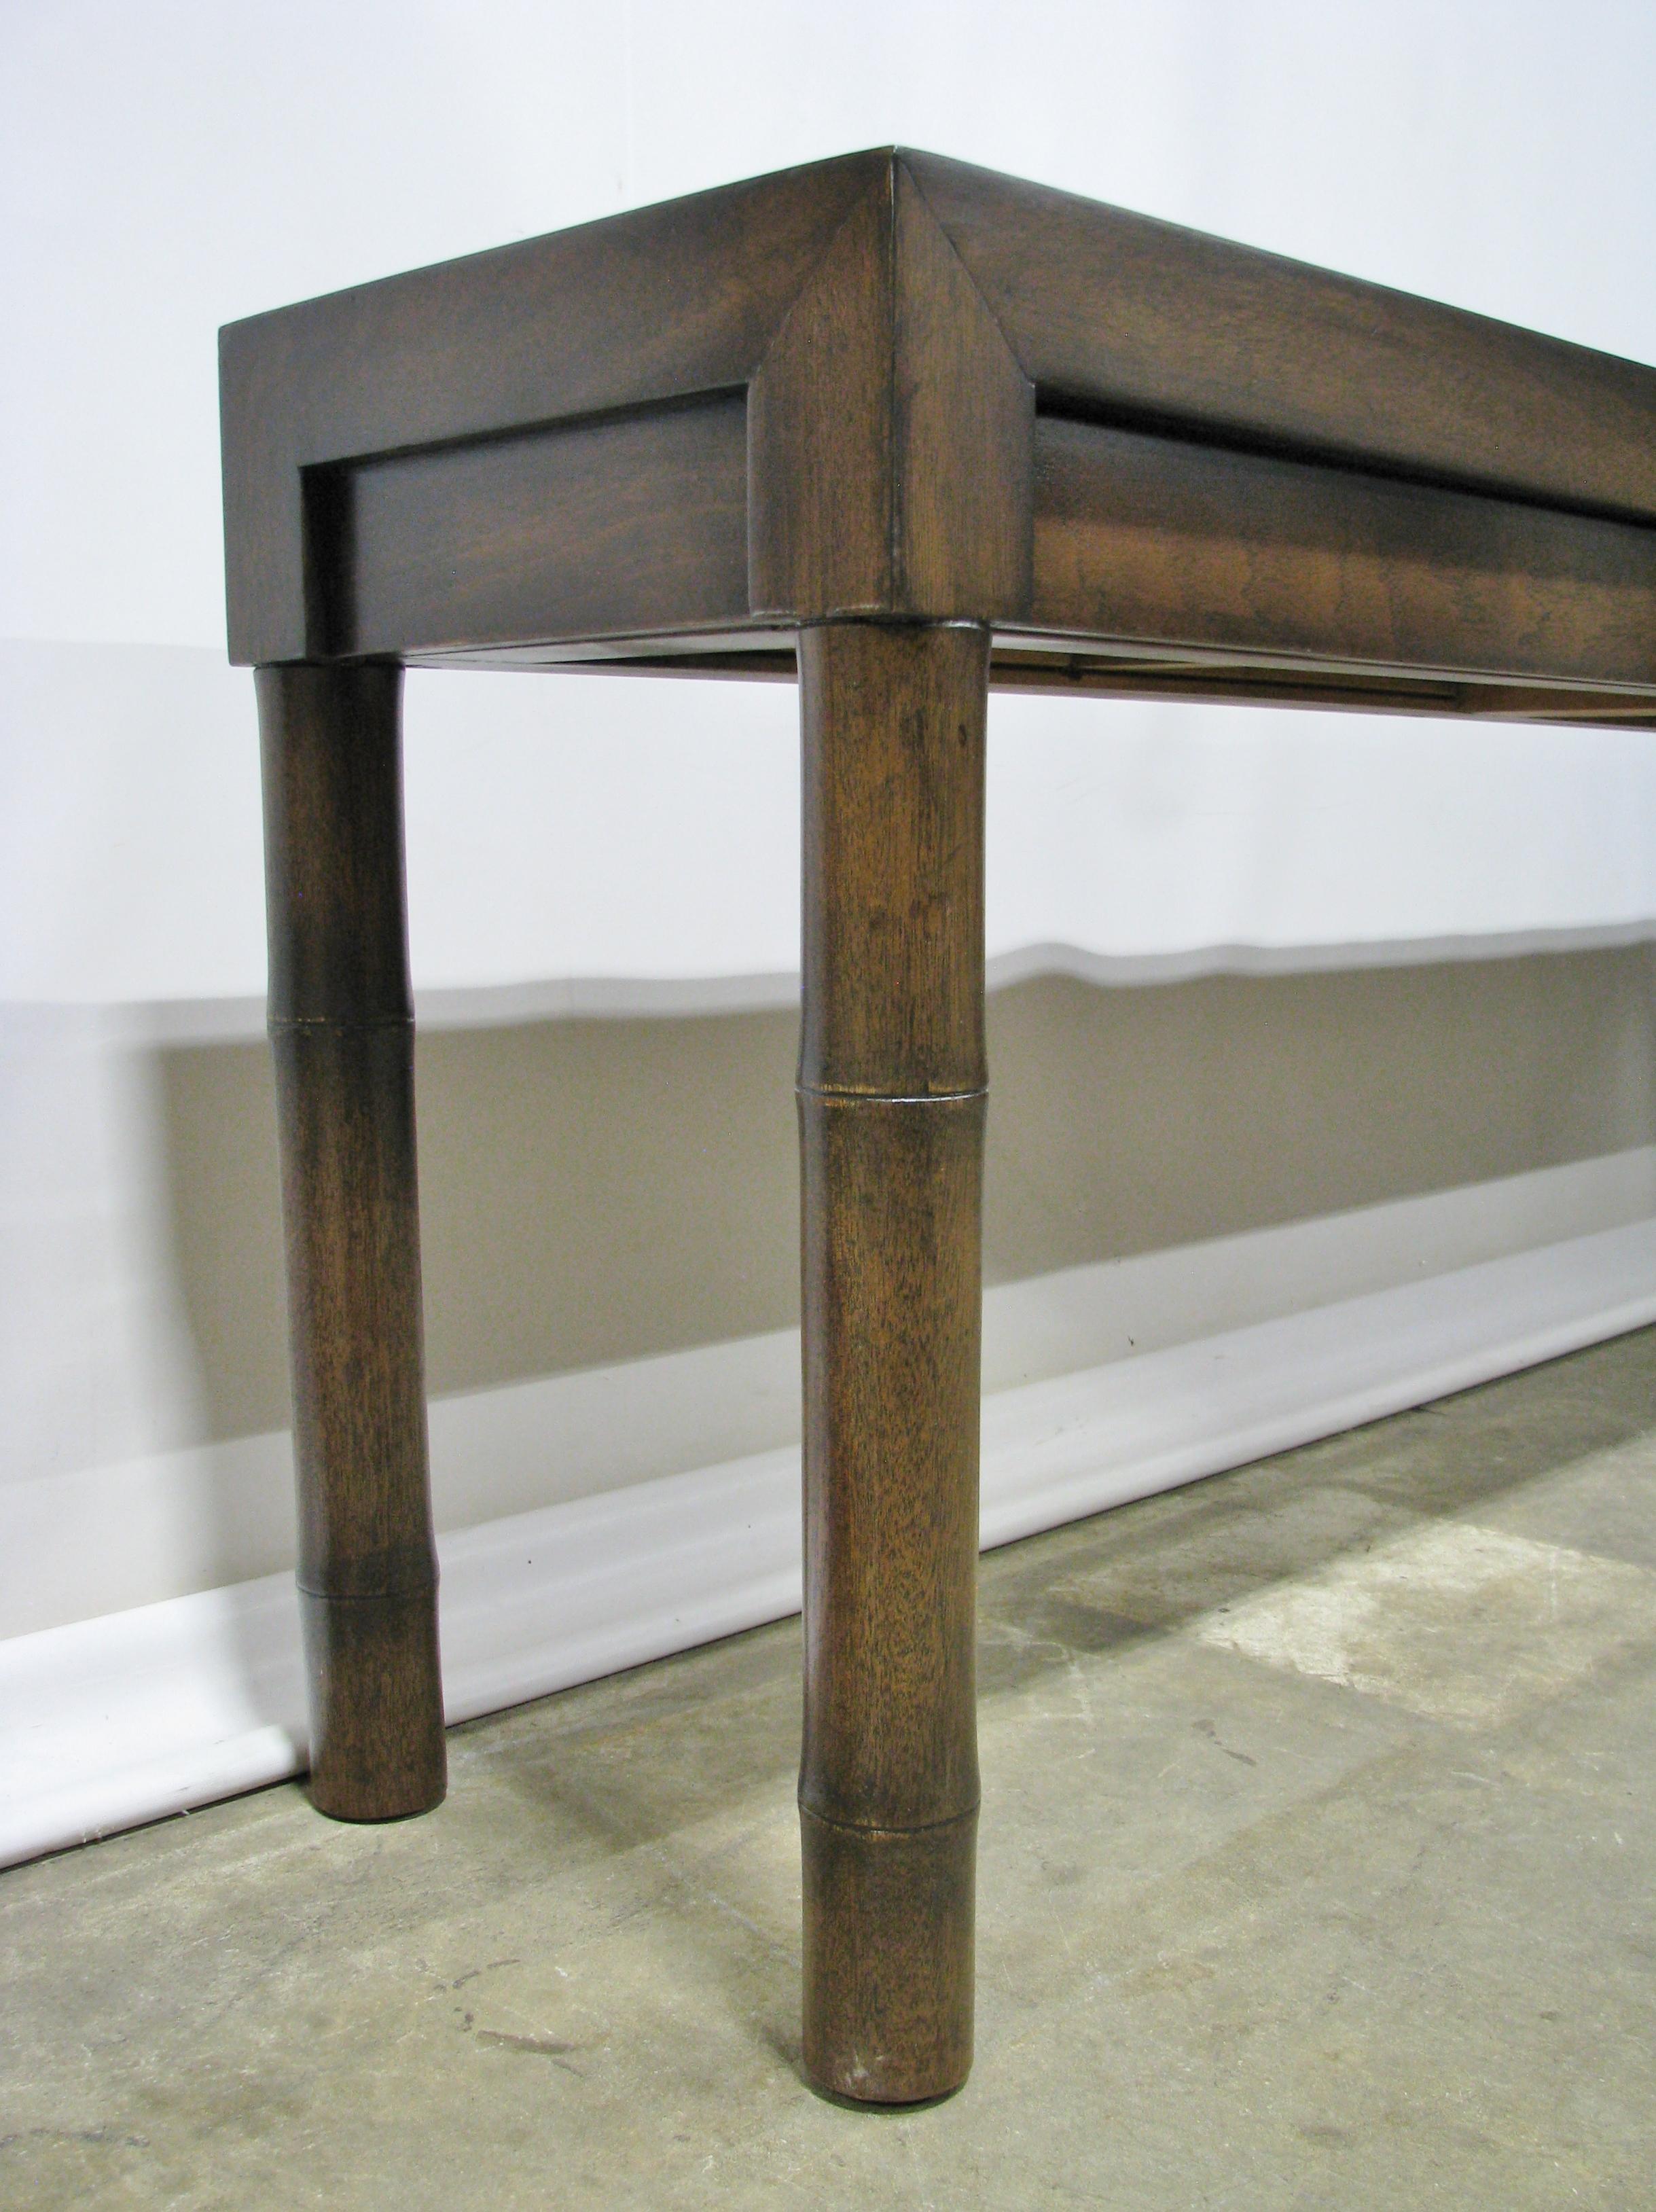 Mahogany Century Furniture 1970s Console / Sofa Table with Faux Bamboo Legs